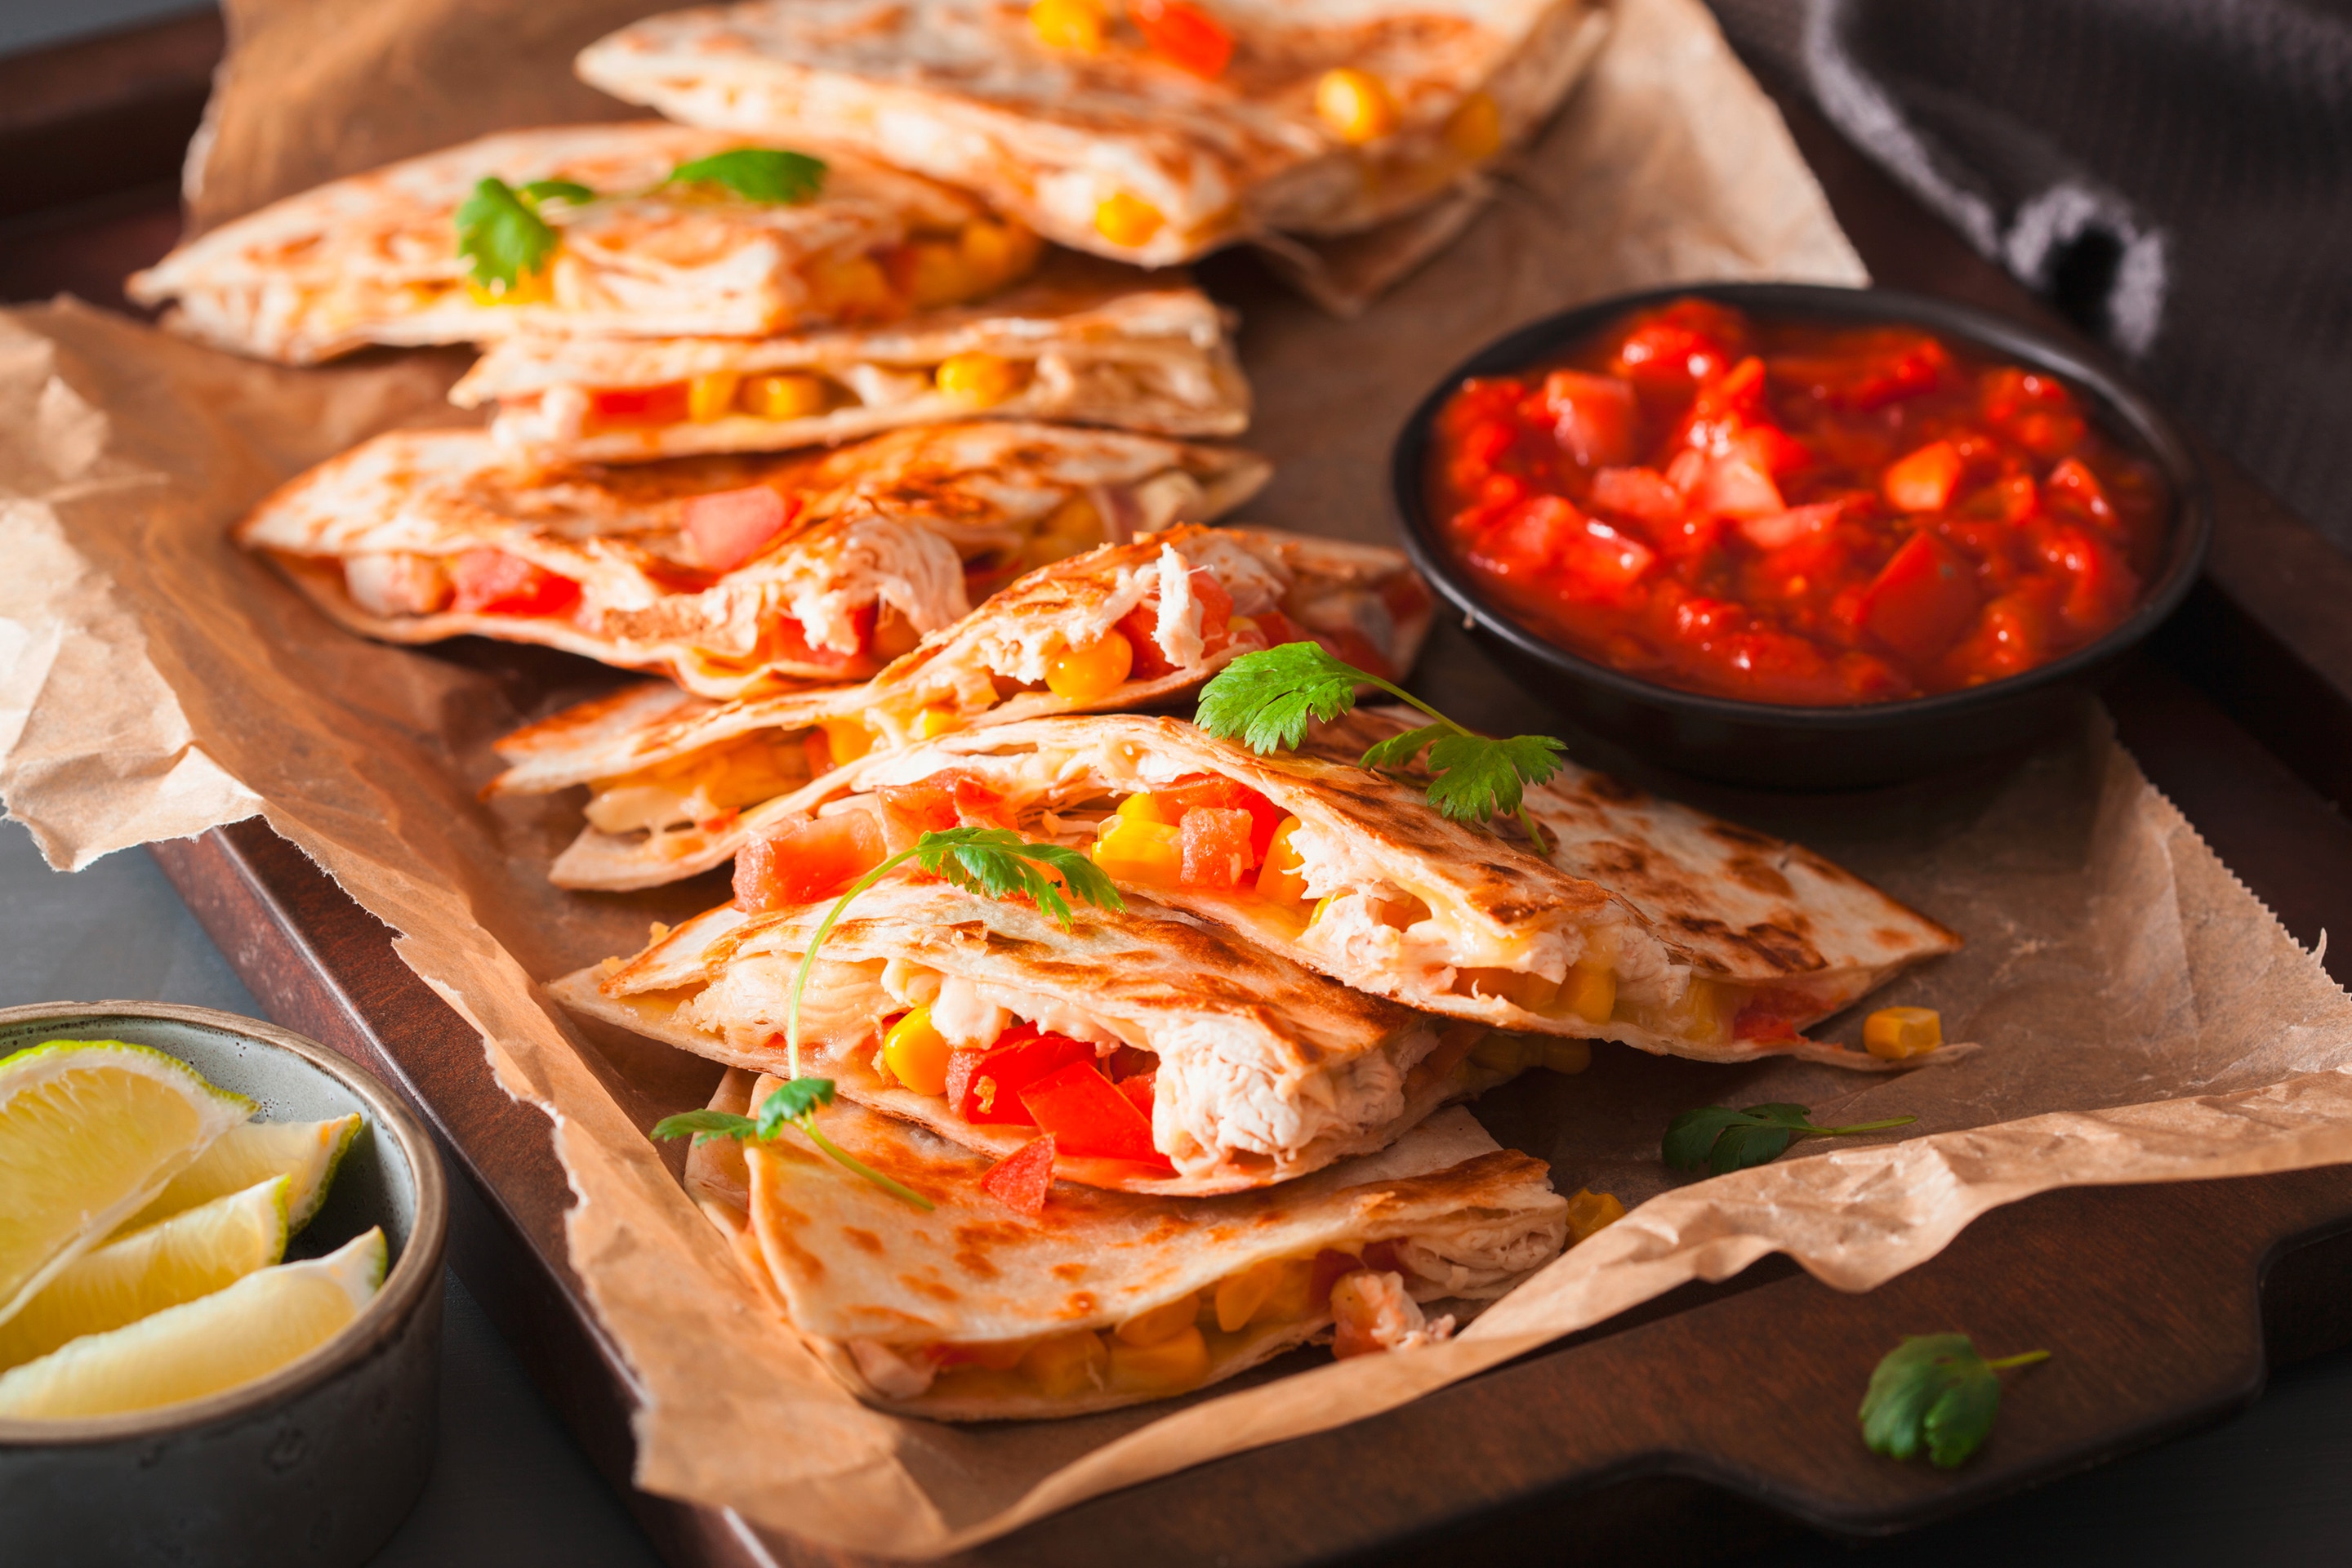 A platter of quesadillas stuffed with tomatoes, corn, cheese, and chicken, served with a side of tomato salsa and limes